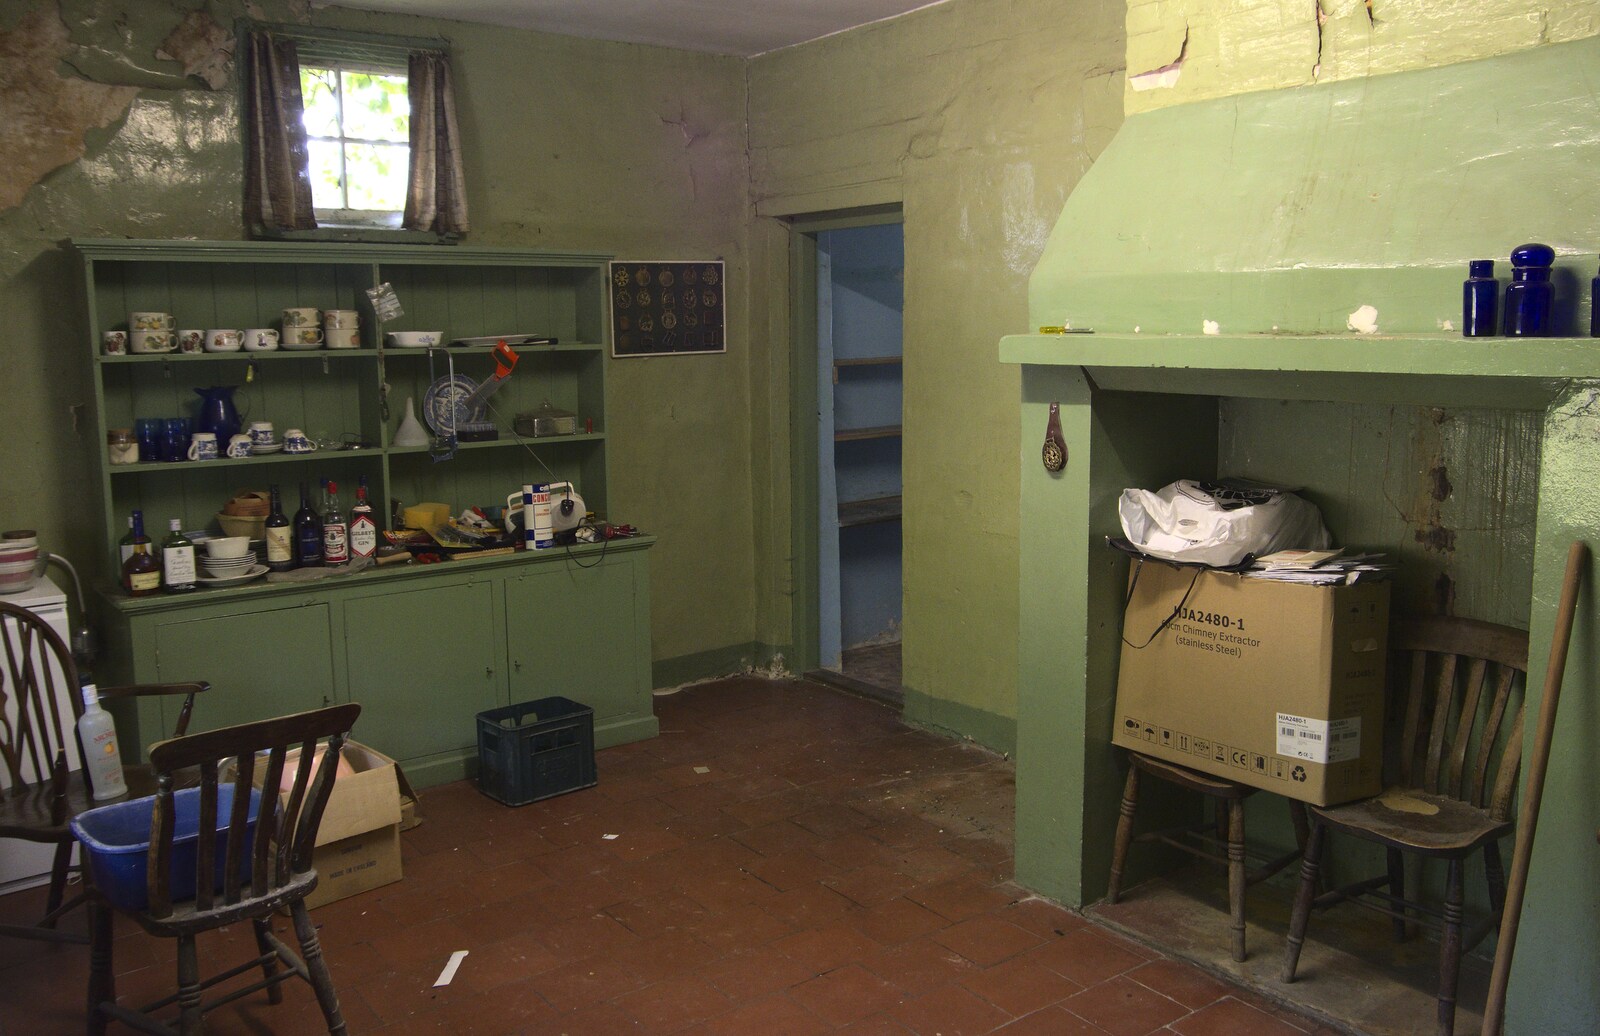 The kitchen - untouched for decades from A 1940s Timewarp, Site 4, Bungay Airfield, Flixton, Suffolk - 9th June 2022